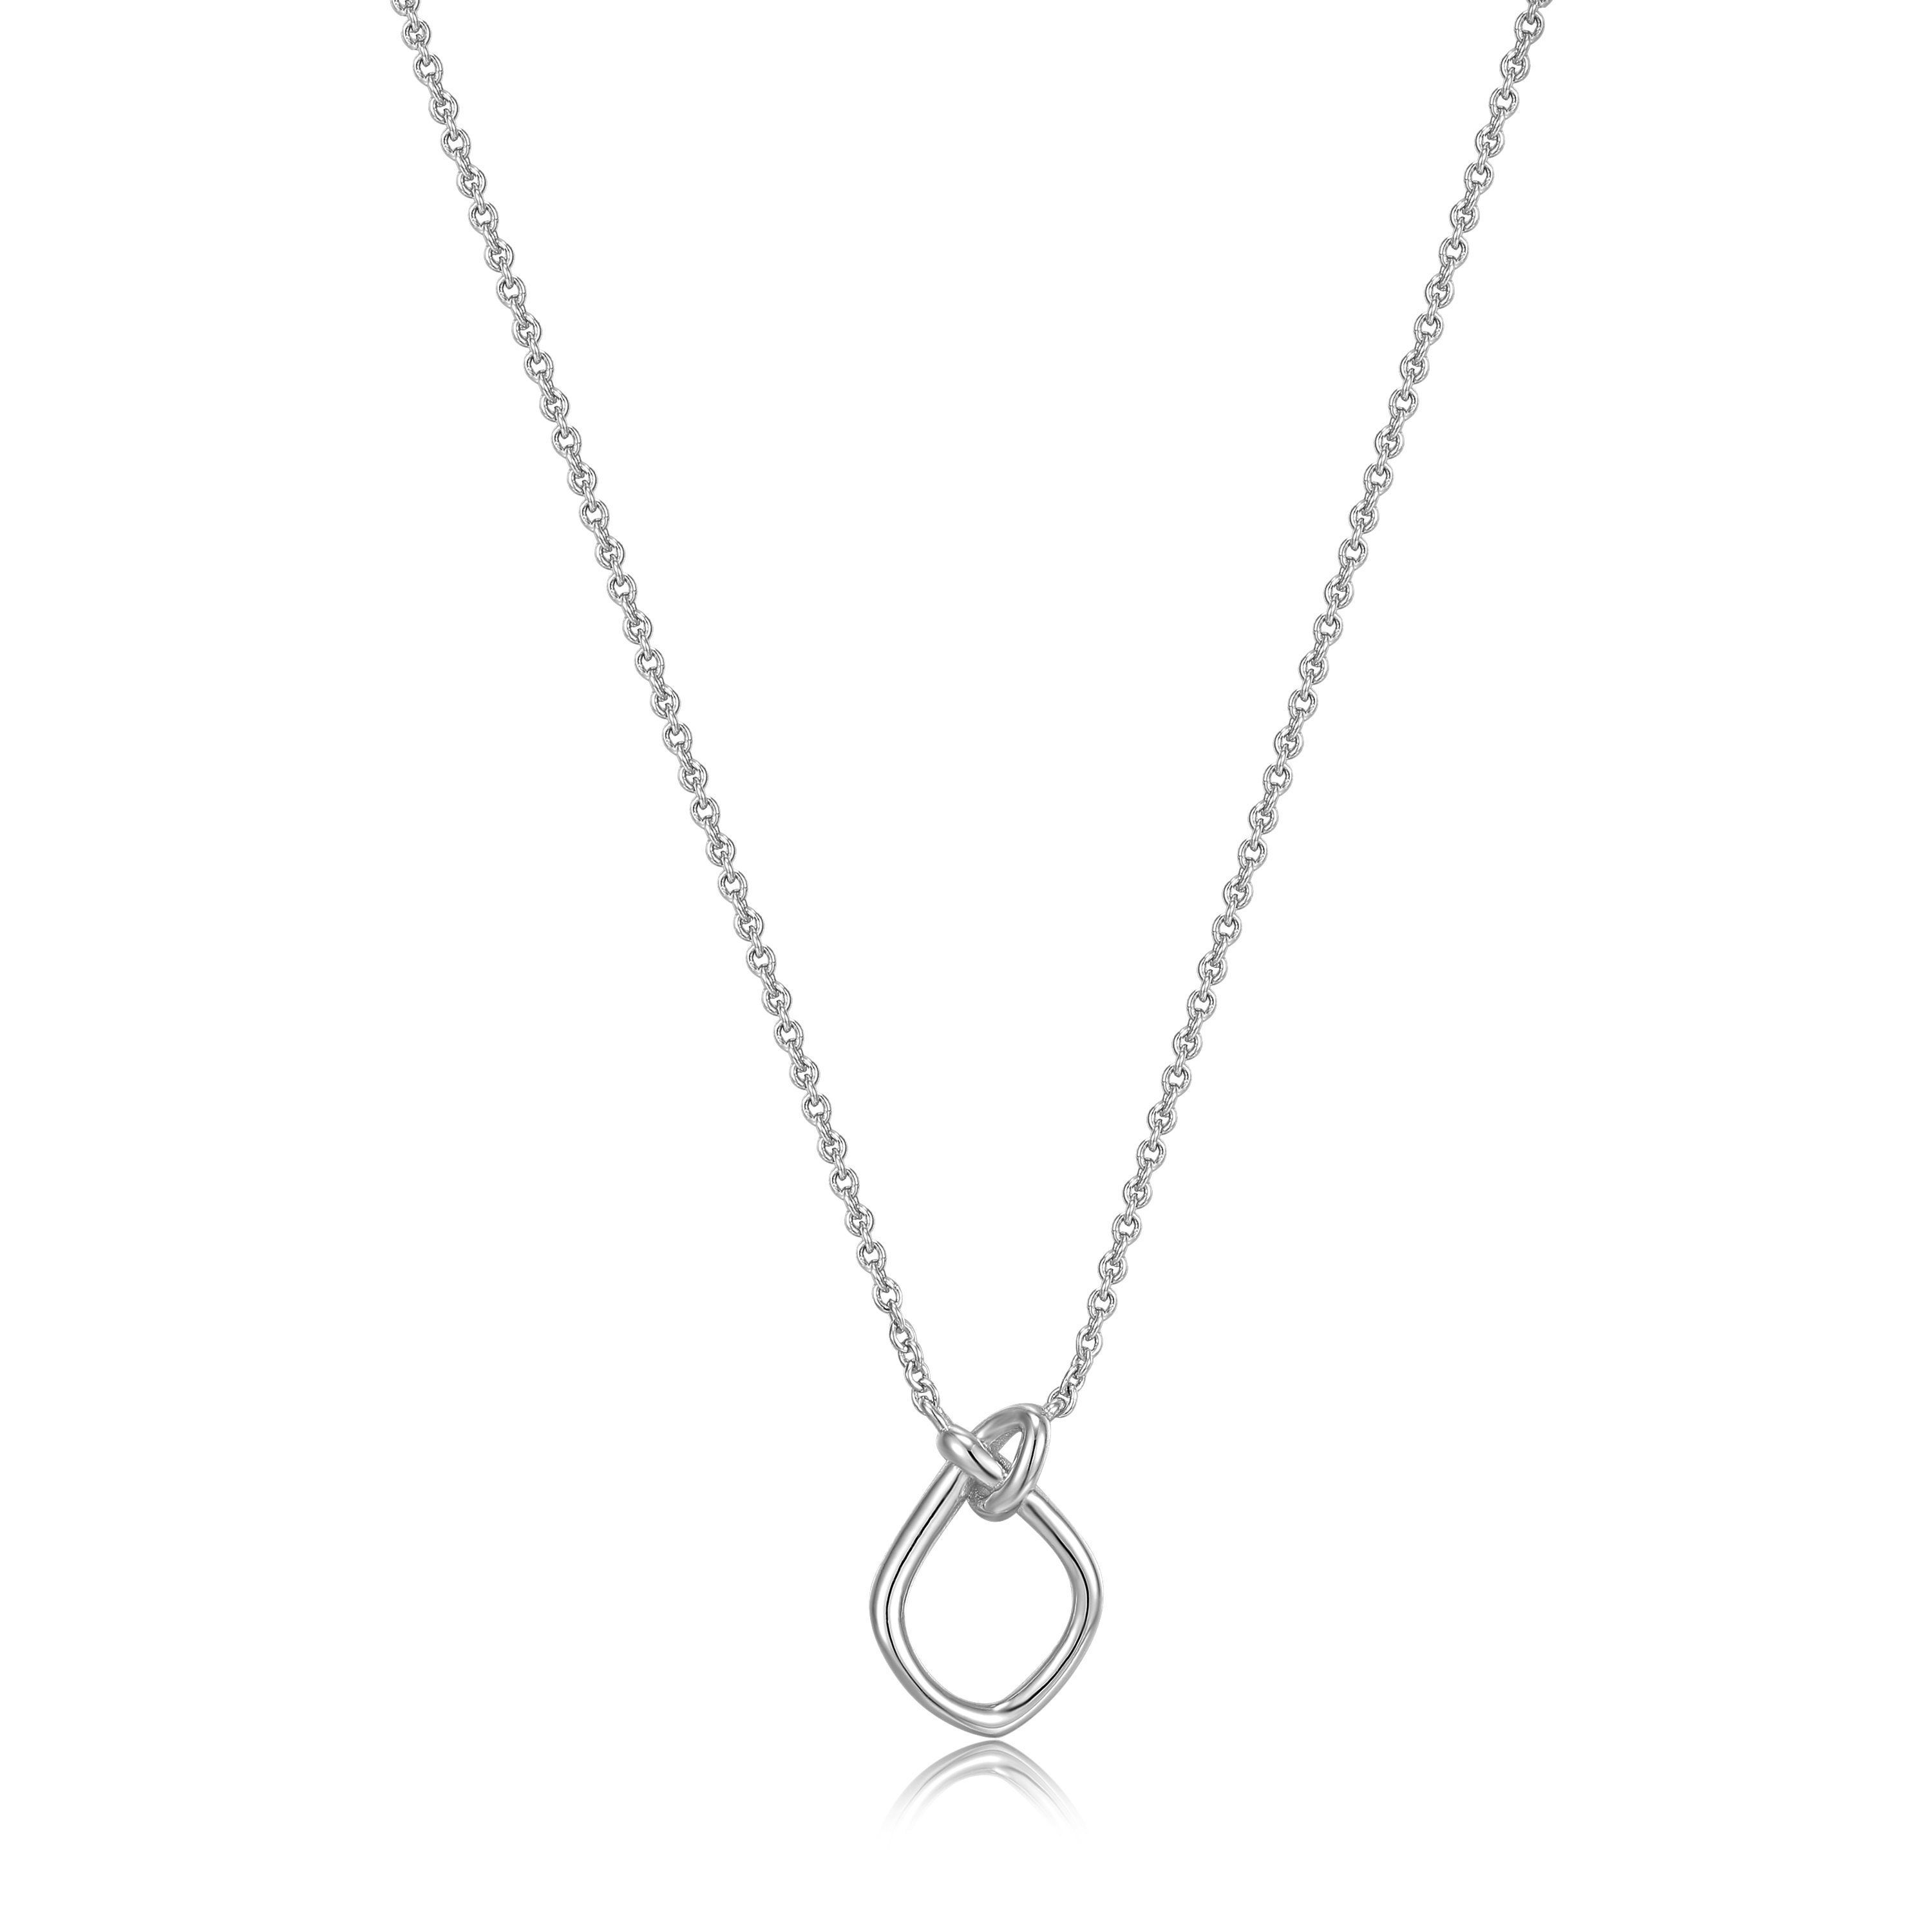 ANIA HAIE Silver Knot Pendant Necklace